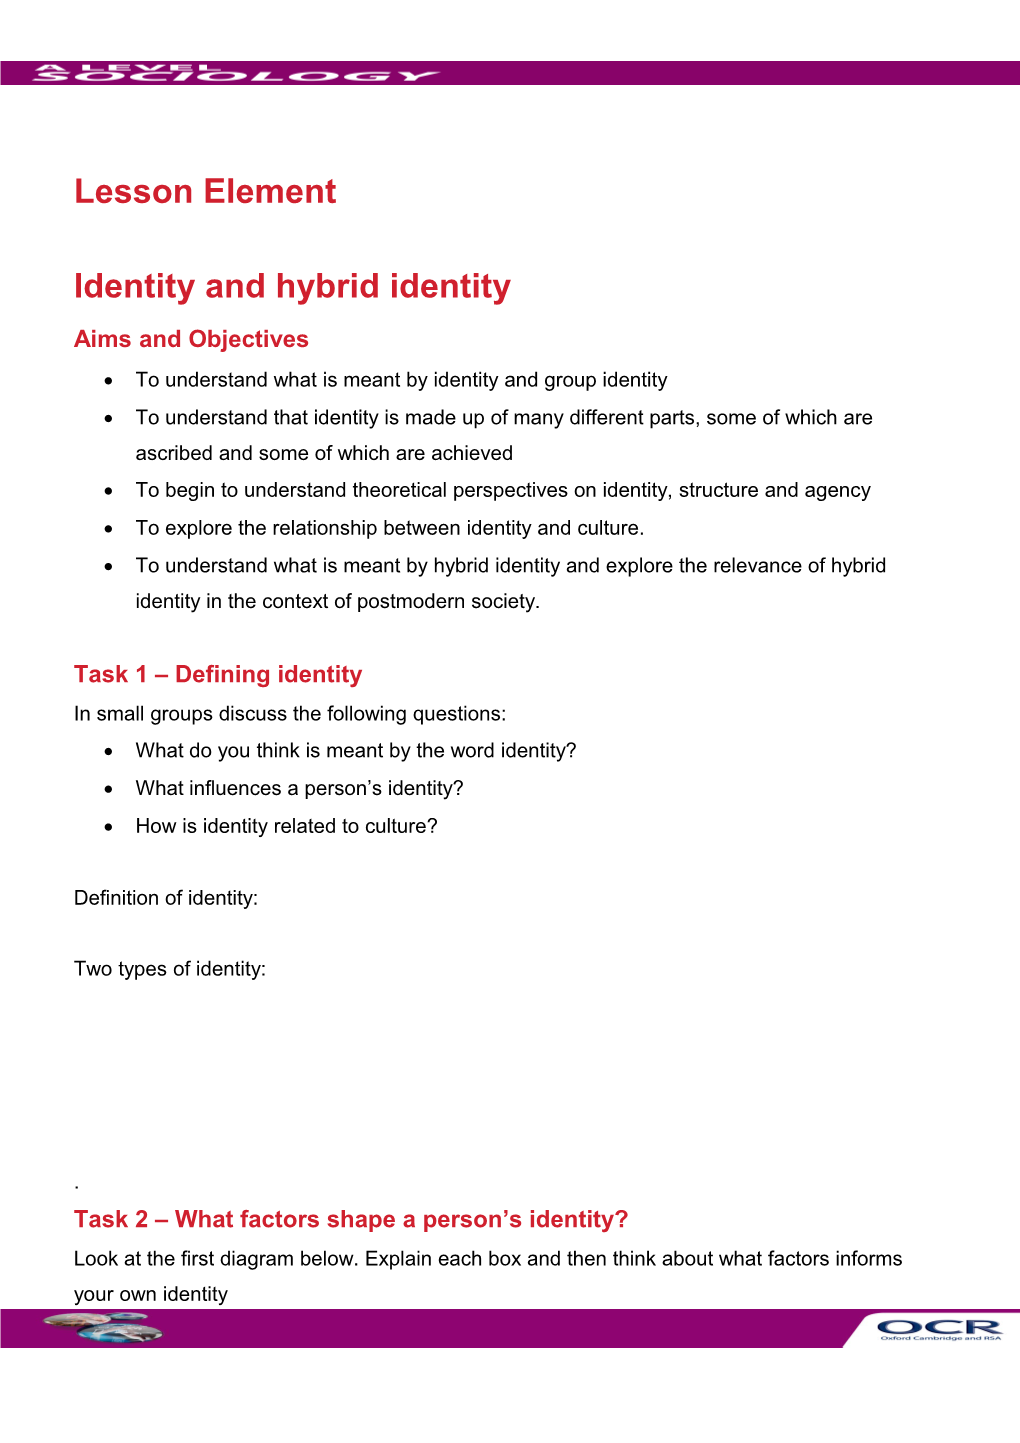 A Level Sociology Lesson Element Learner Activity (Indentity and Hybrid Identity)